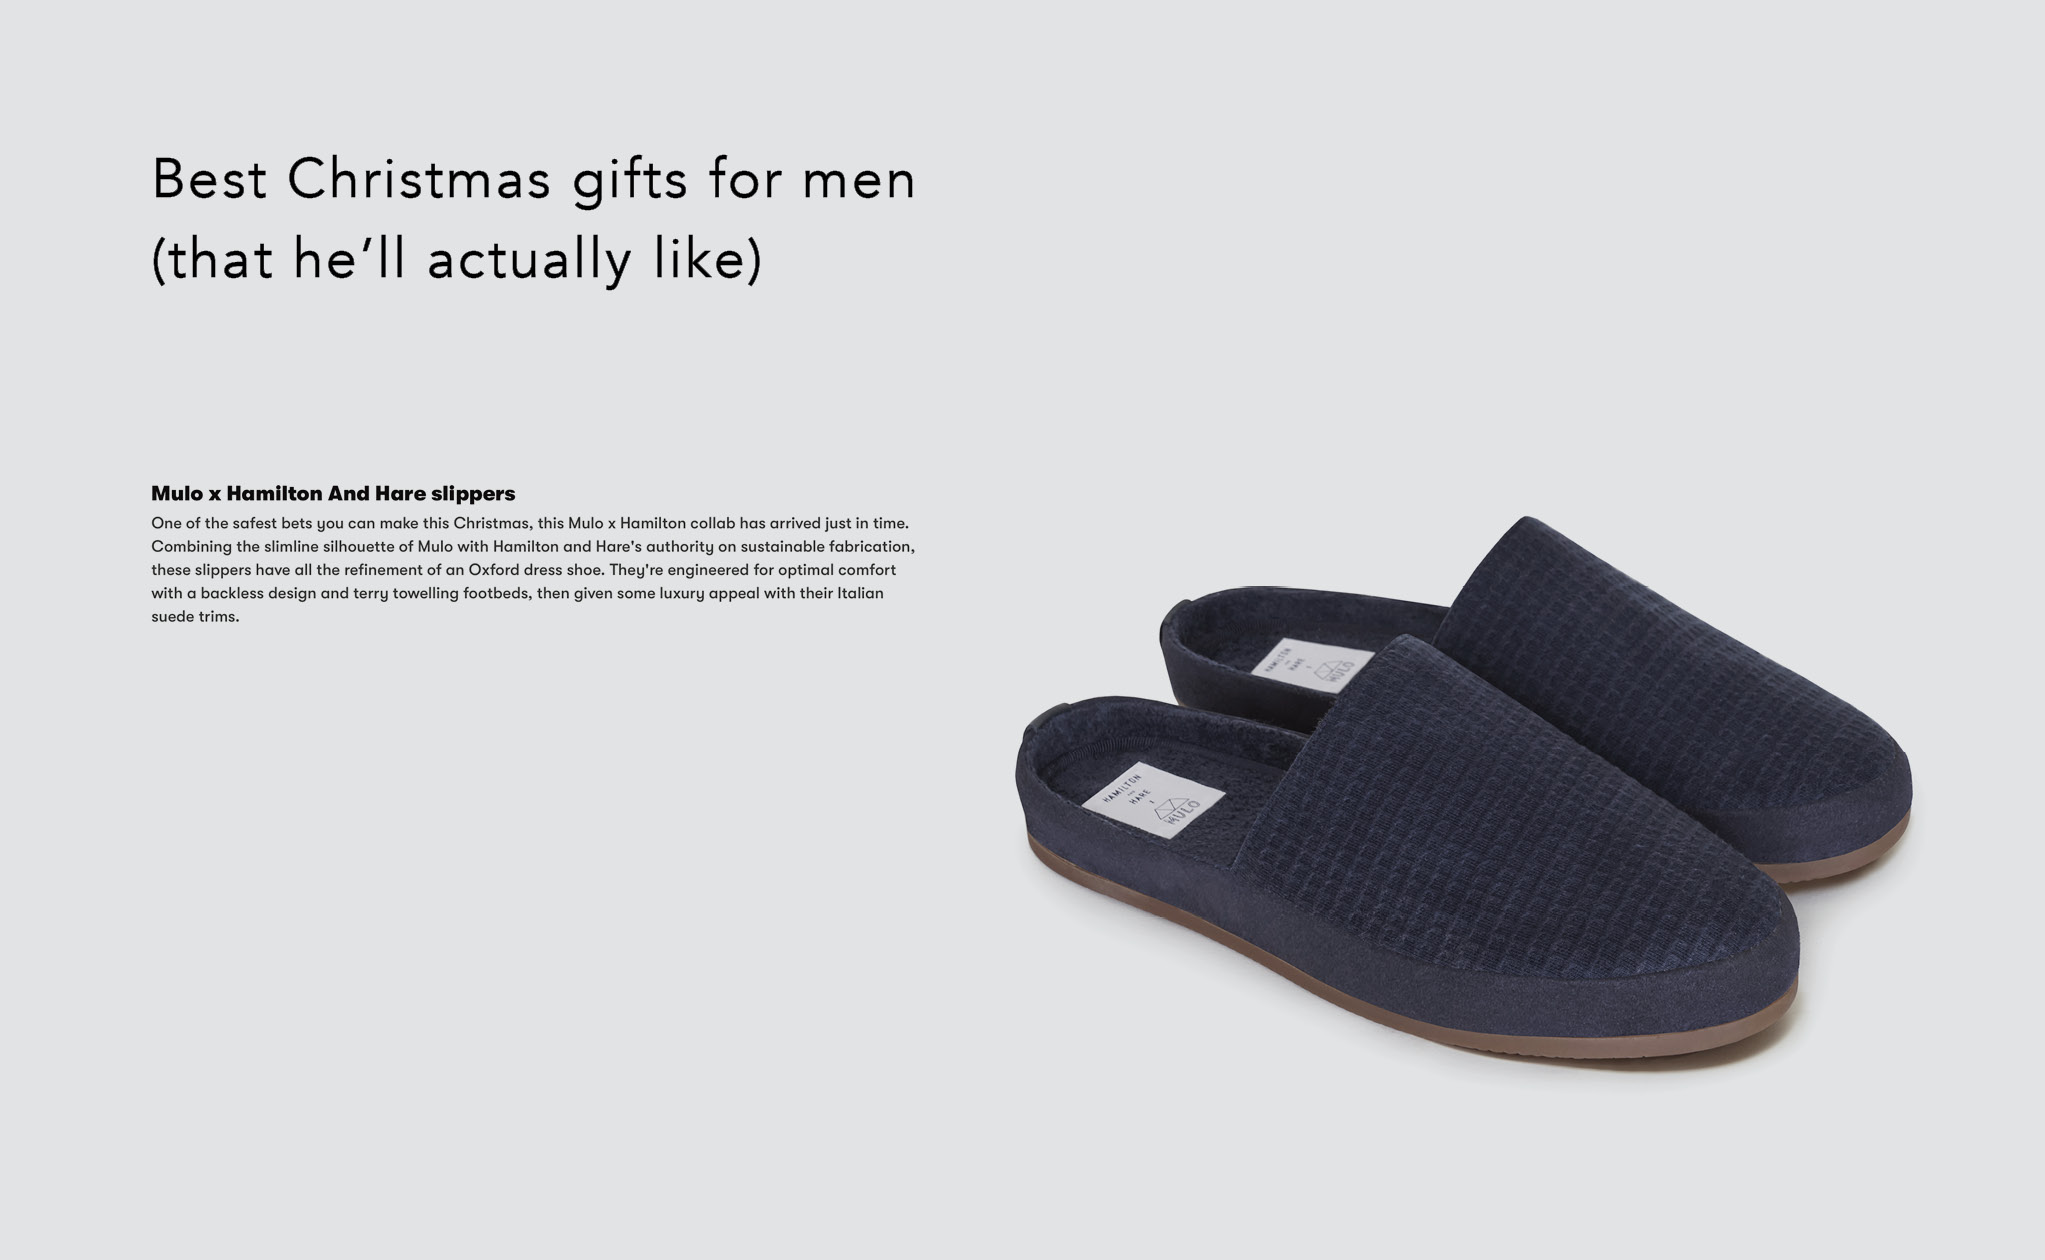 Mens Slippers - Gifts for Men Christmas by GQ